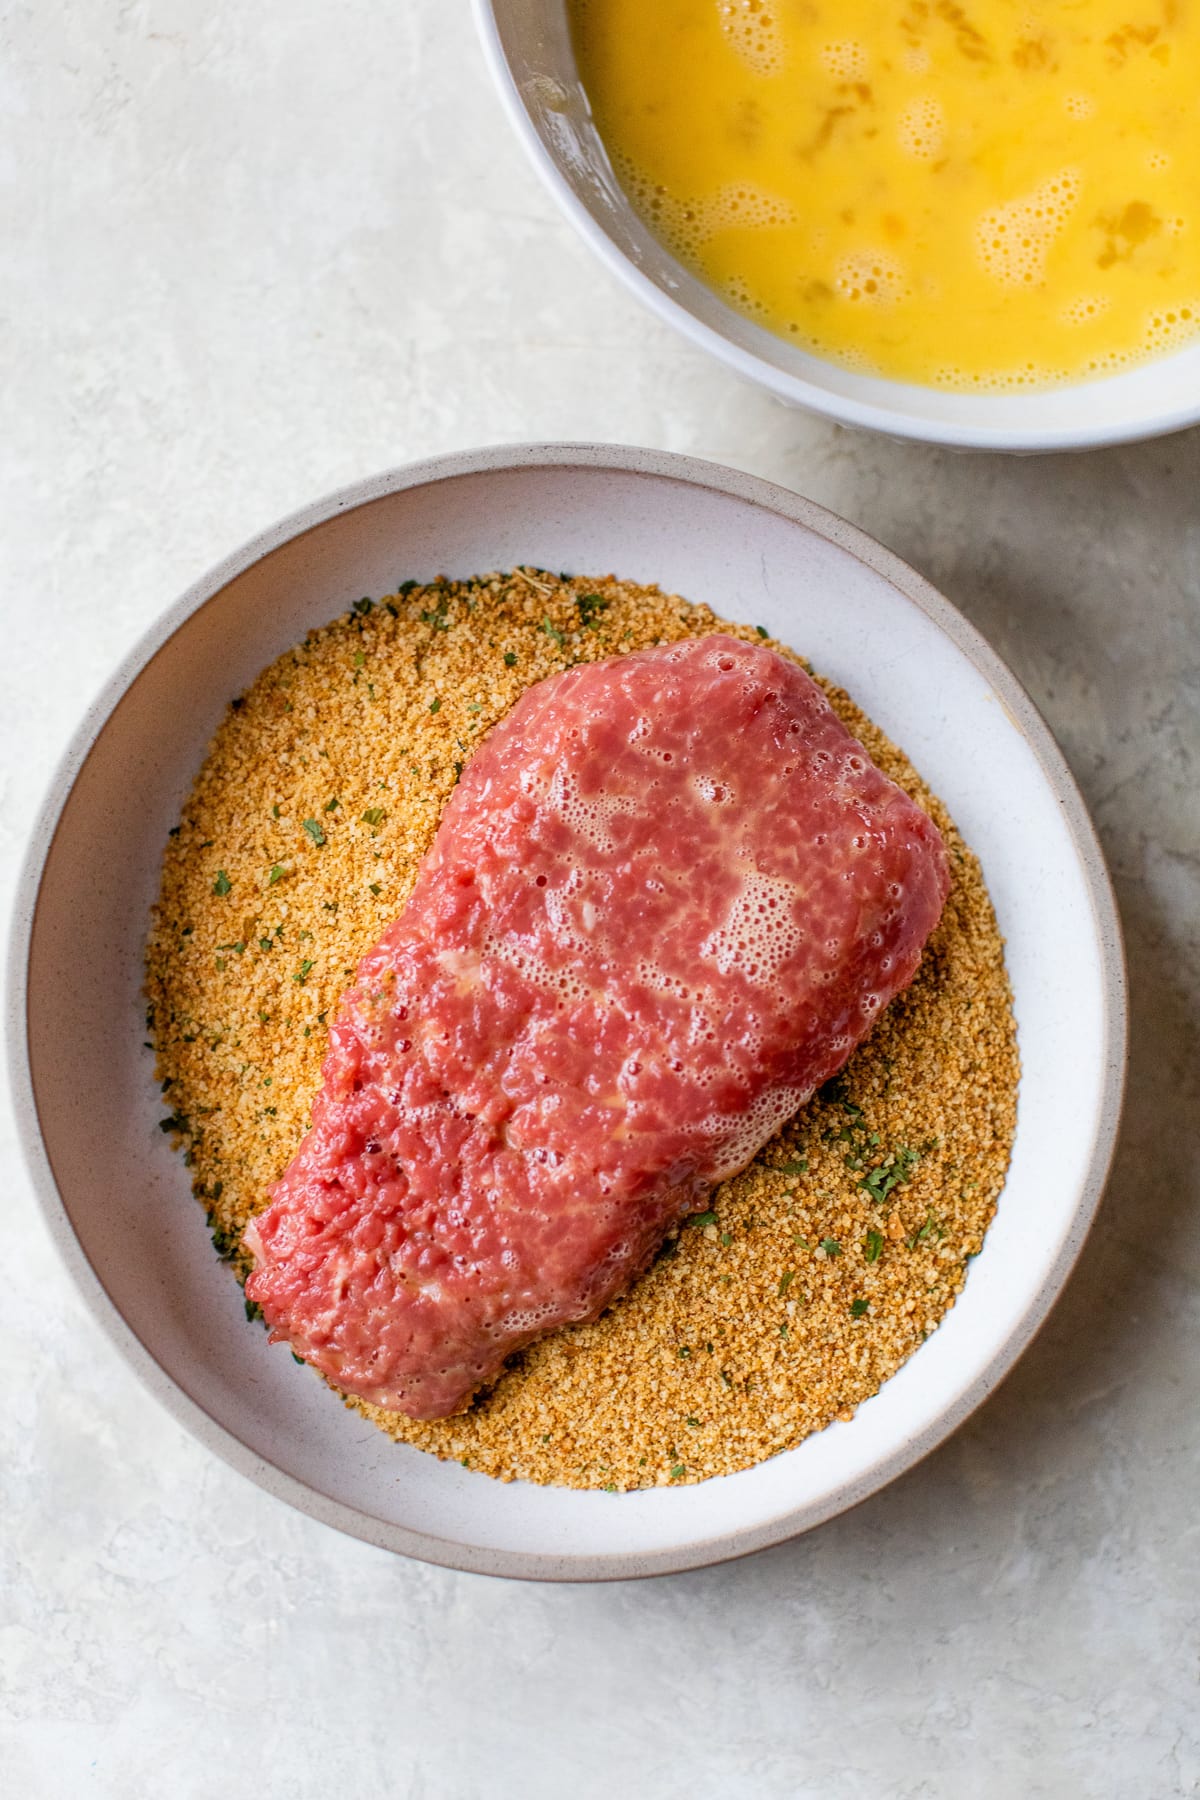 cubed steak in egg and breadcrumbs